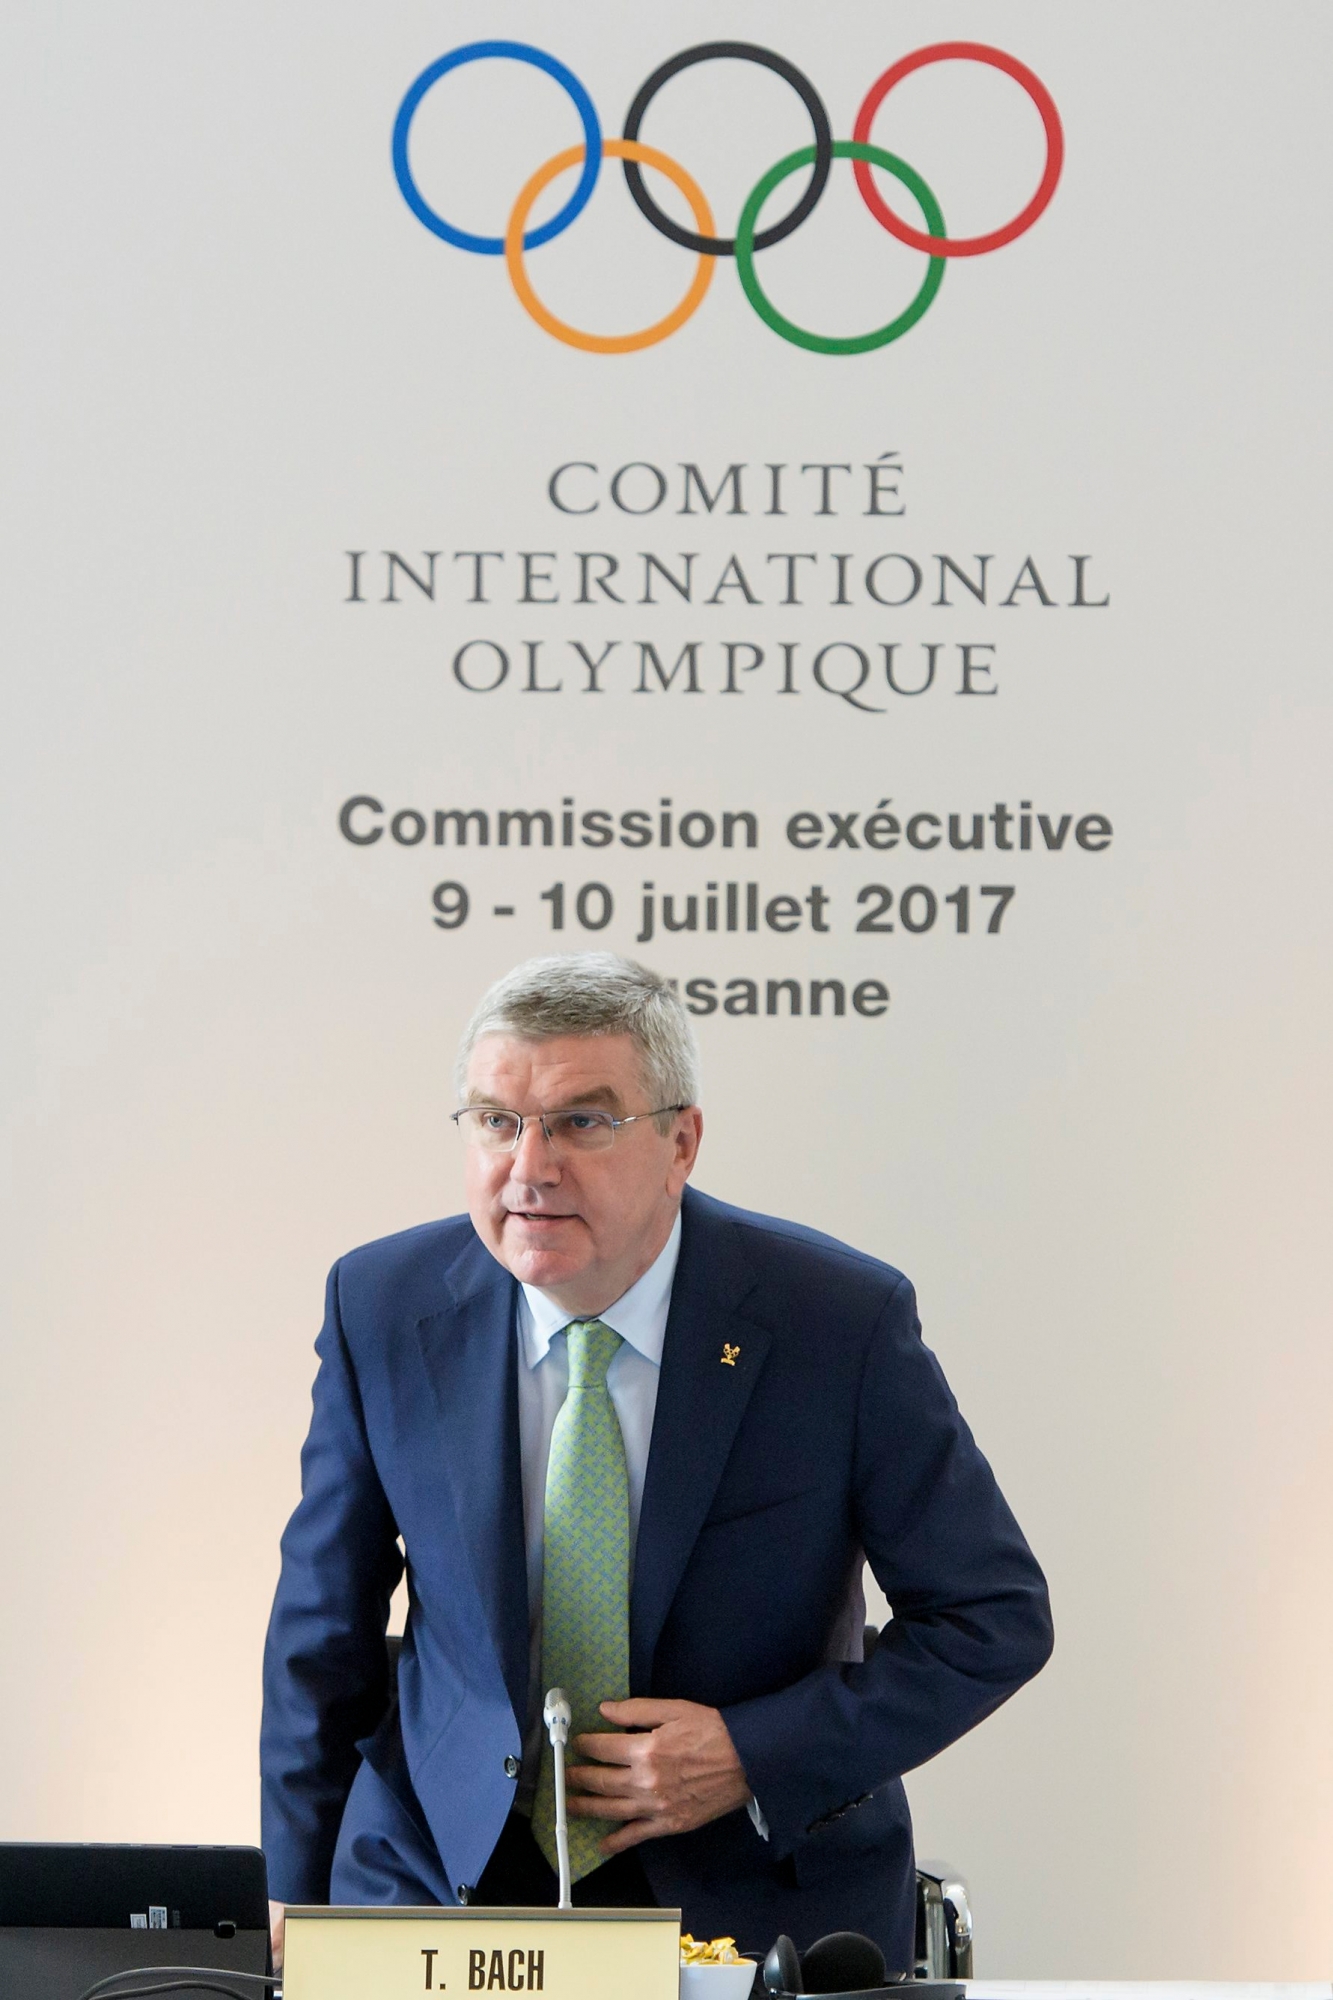 International Olympic Committee, IOC, President Thomas Bach from Germany arrives for the opening of the IOC executive board meeting in Lausanne, Switzerland, Switzerland, Sunday, July 9, 2017. (Jean-Christophe Bott/Keystone via AP) Switzerland IOC Executive Board Meeting